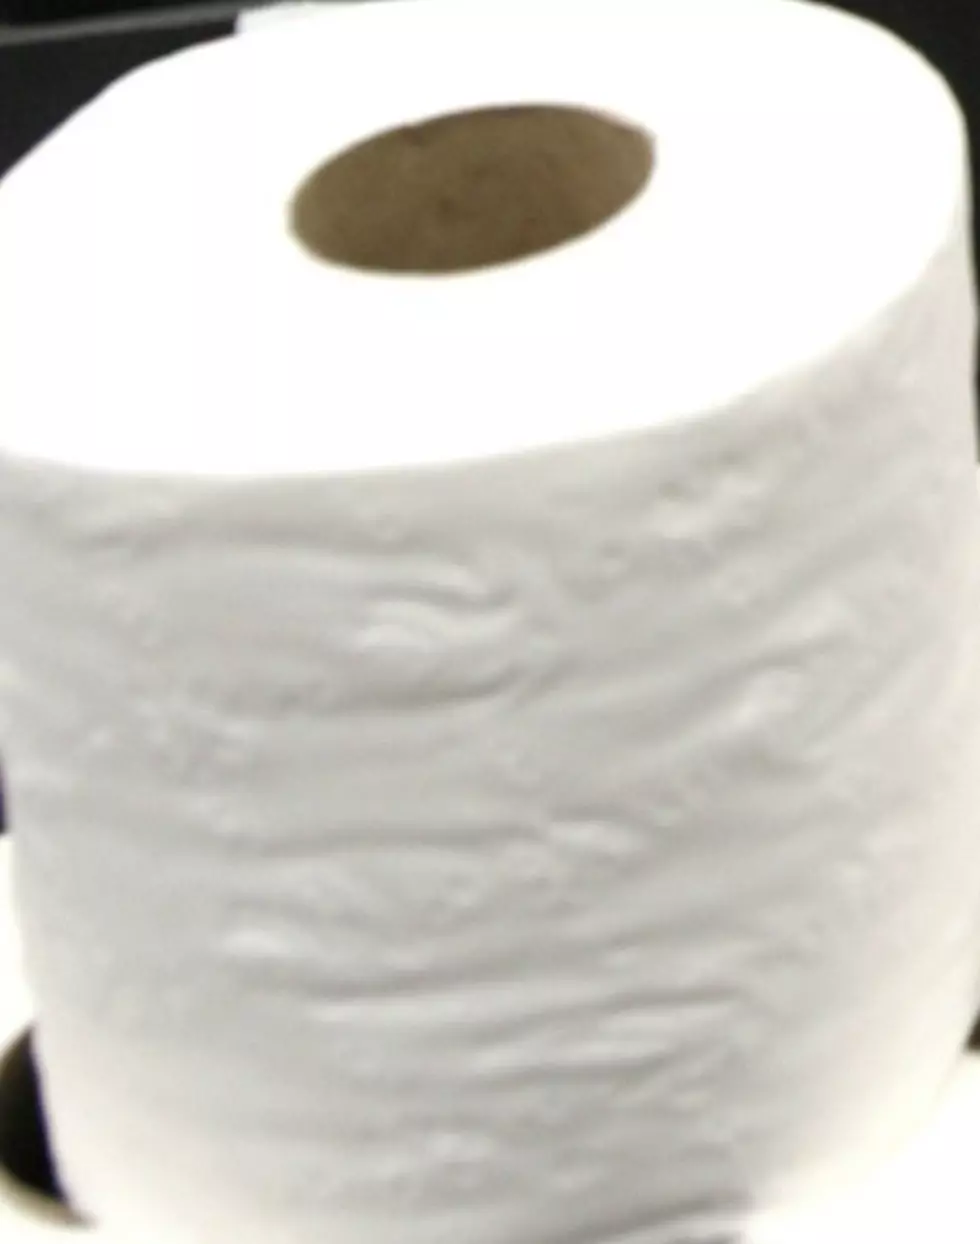 Mom Gets Creative &#038; Uses Toilet Paper As Kids’ Allowance